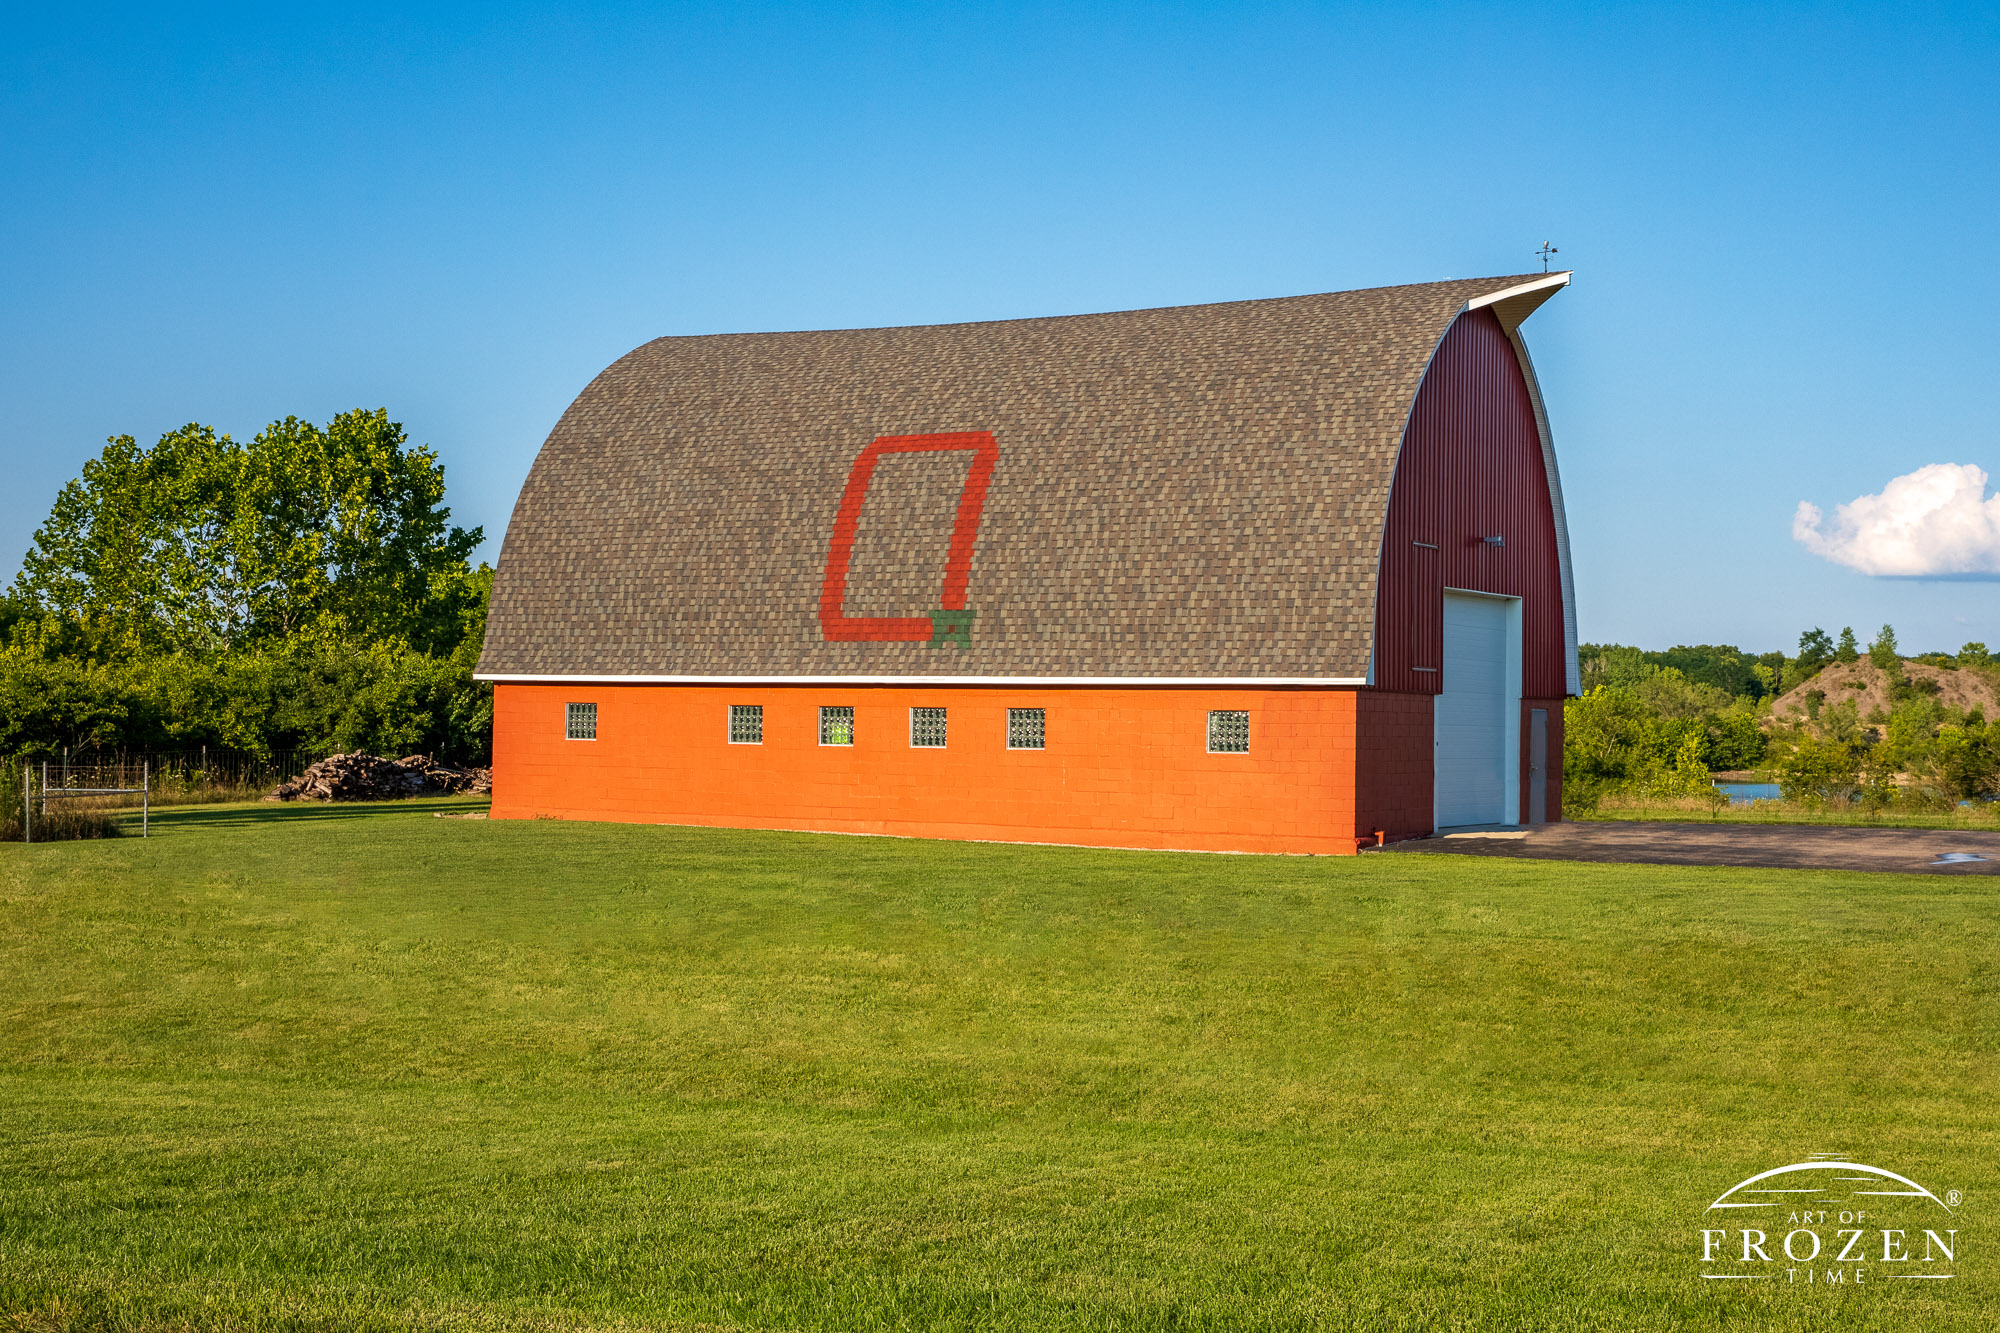 A gothic arch barn whose shingles display a large O for Ohio and classic buckeye leaf that's basking in the golden evening light